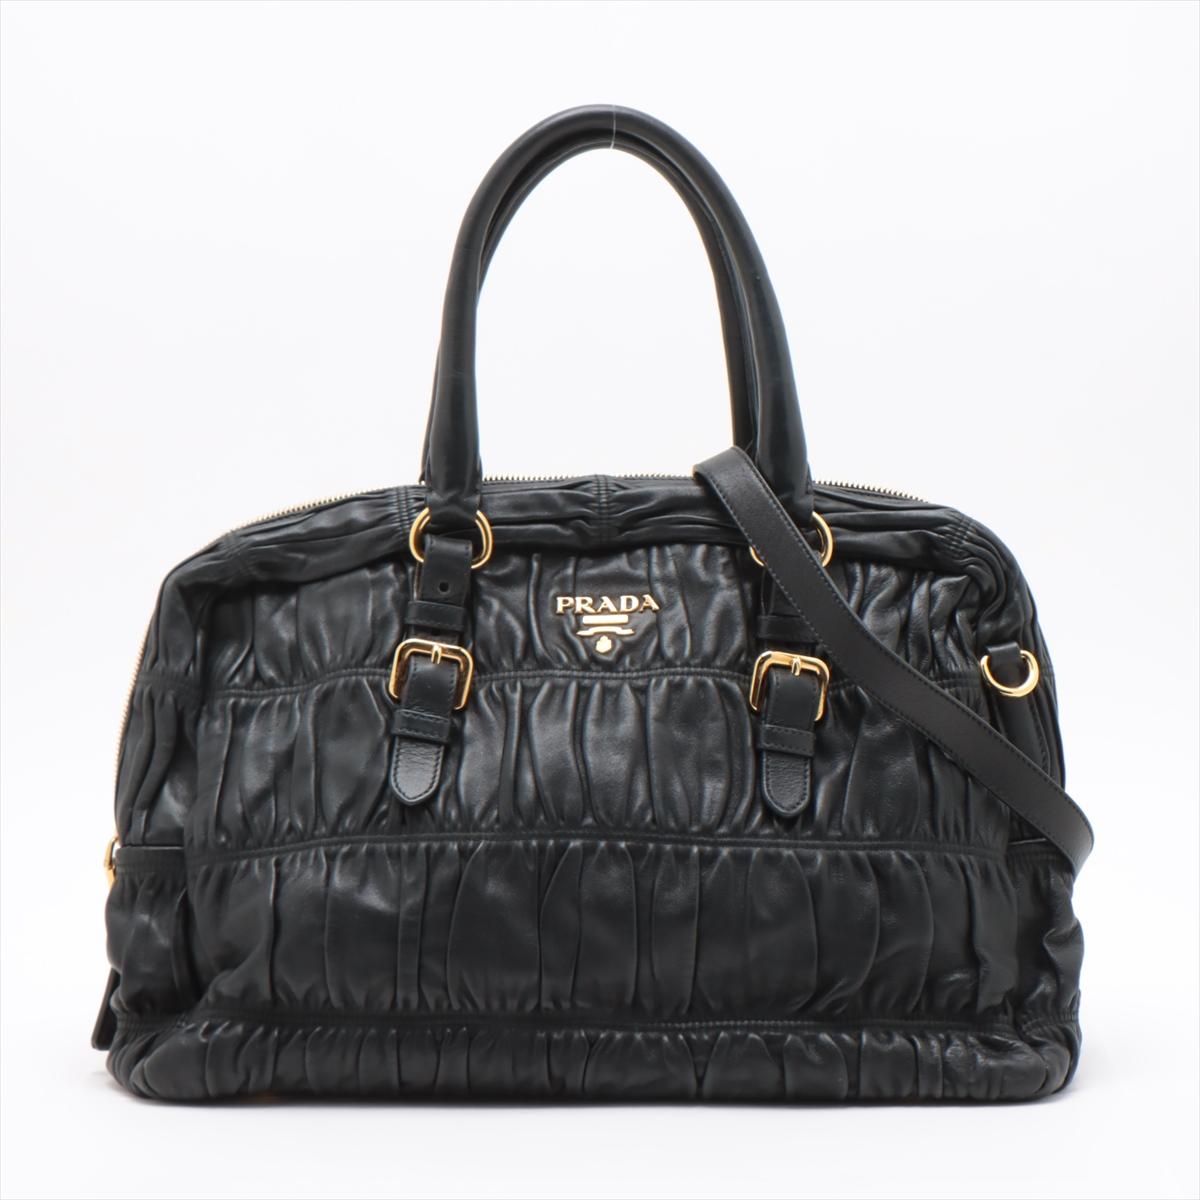 The Prada Nappa Gaufre Leather Two-Way Satchel Bag in Black is a luxurious and versatile accessory that seamlessly combines sophistication with practicality. Crafted from sumptuous Nappa Gaufre leather, the bag features a distinctive quilted pattern